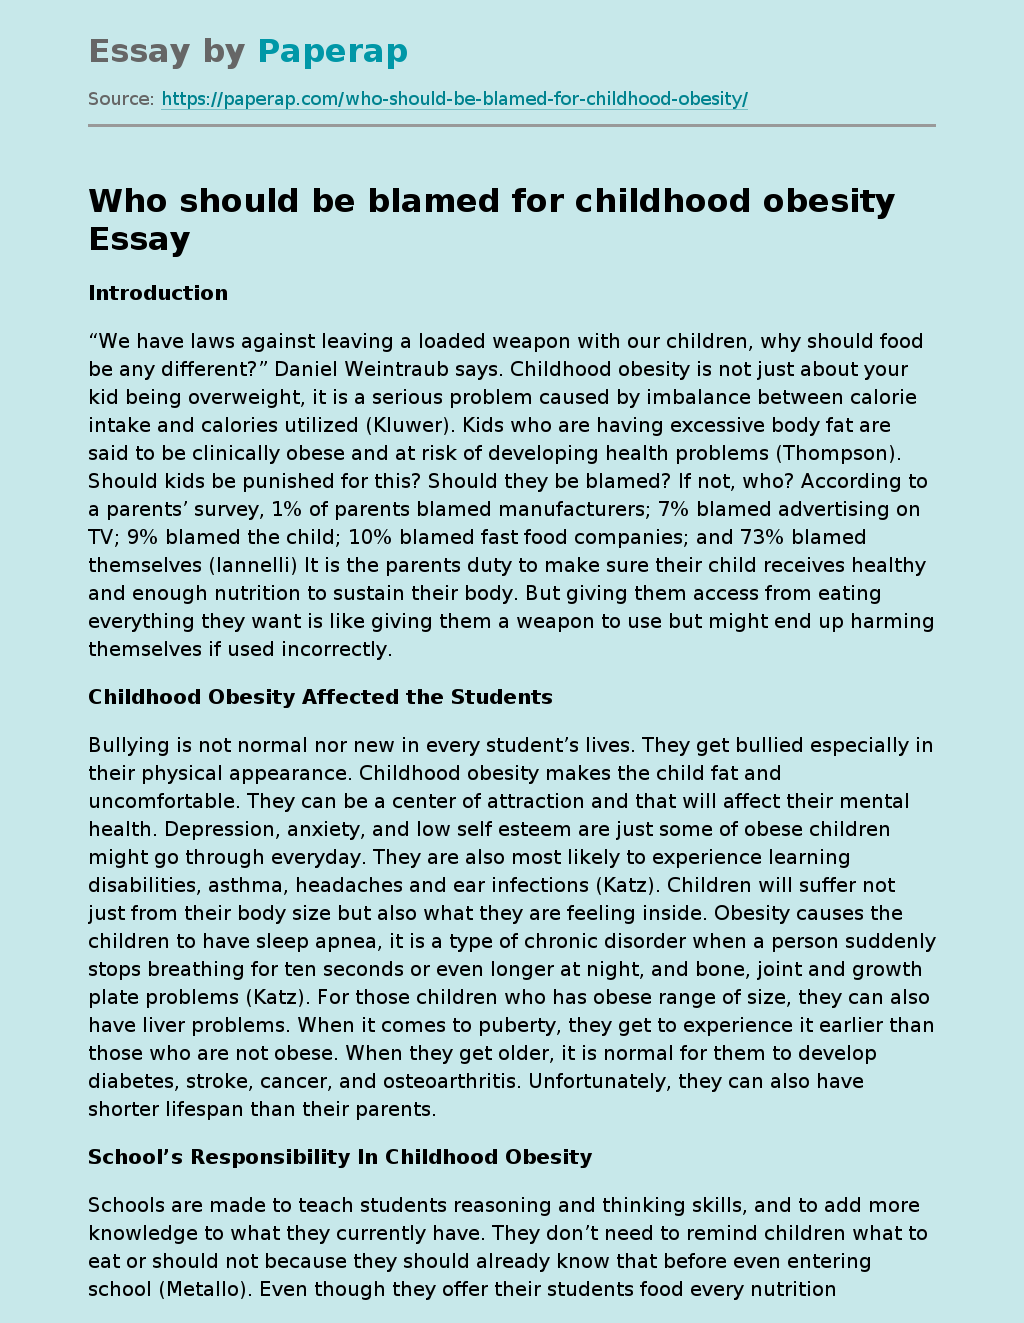 Who should be blamed for childhood obesity